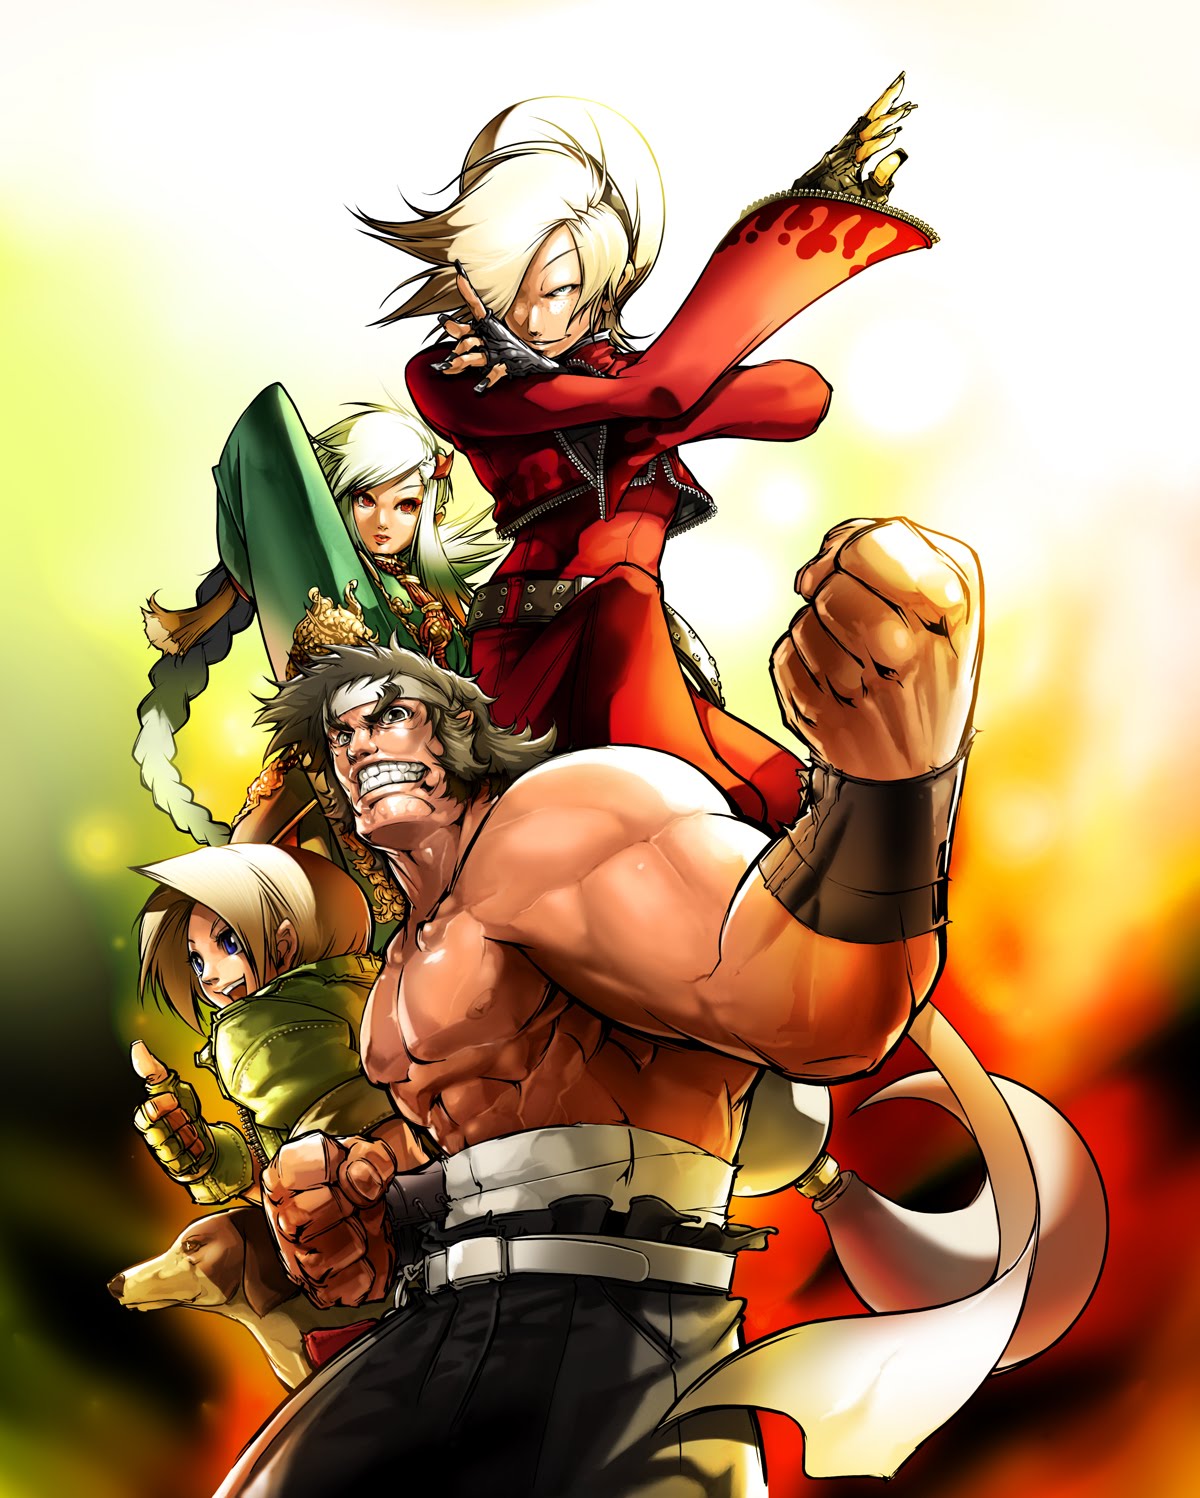 kof wallpapers | Download free PC PS2 PSP XBOX GAMES, SOFTWARES TV ...